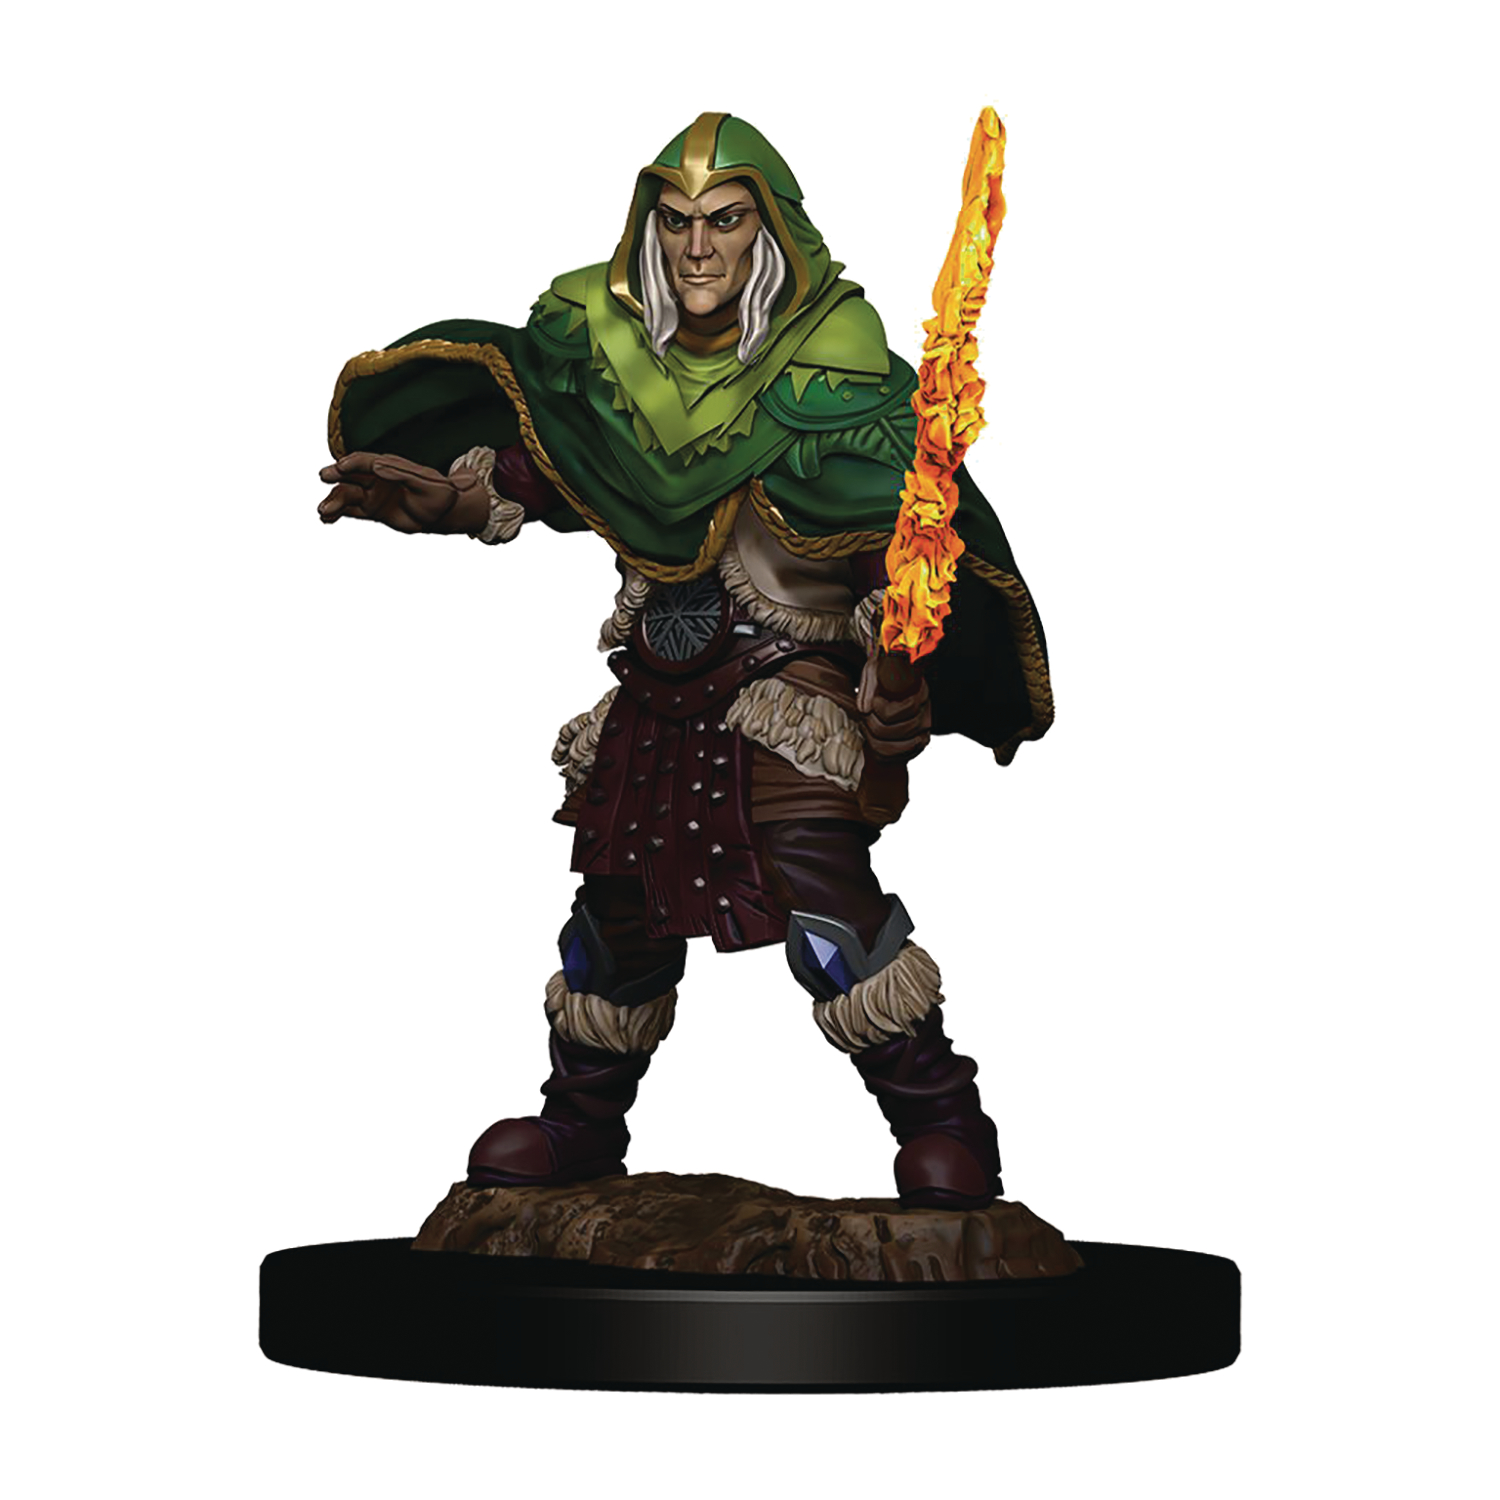 Dungeons & Dragons Fantasy Miniatures: Icons of the Realms Premium Figures Wave 5 Elf Fighter Male